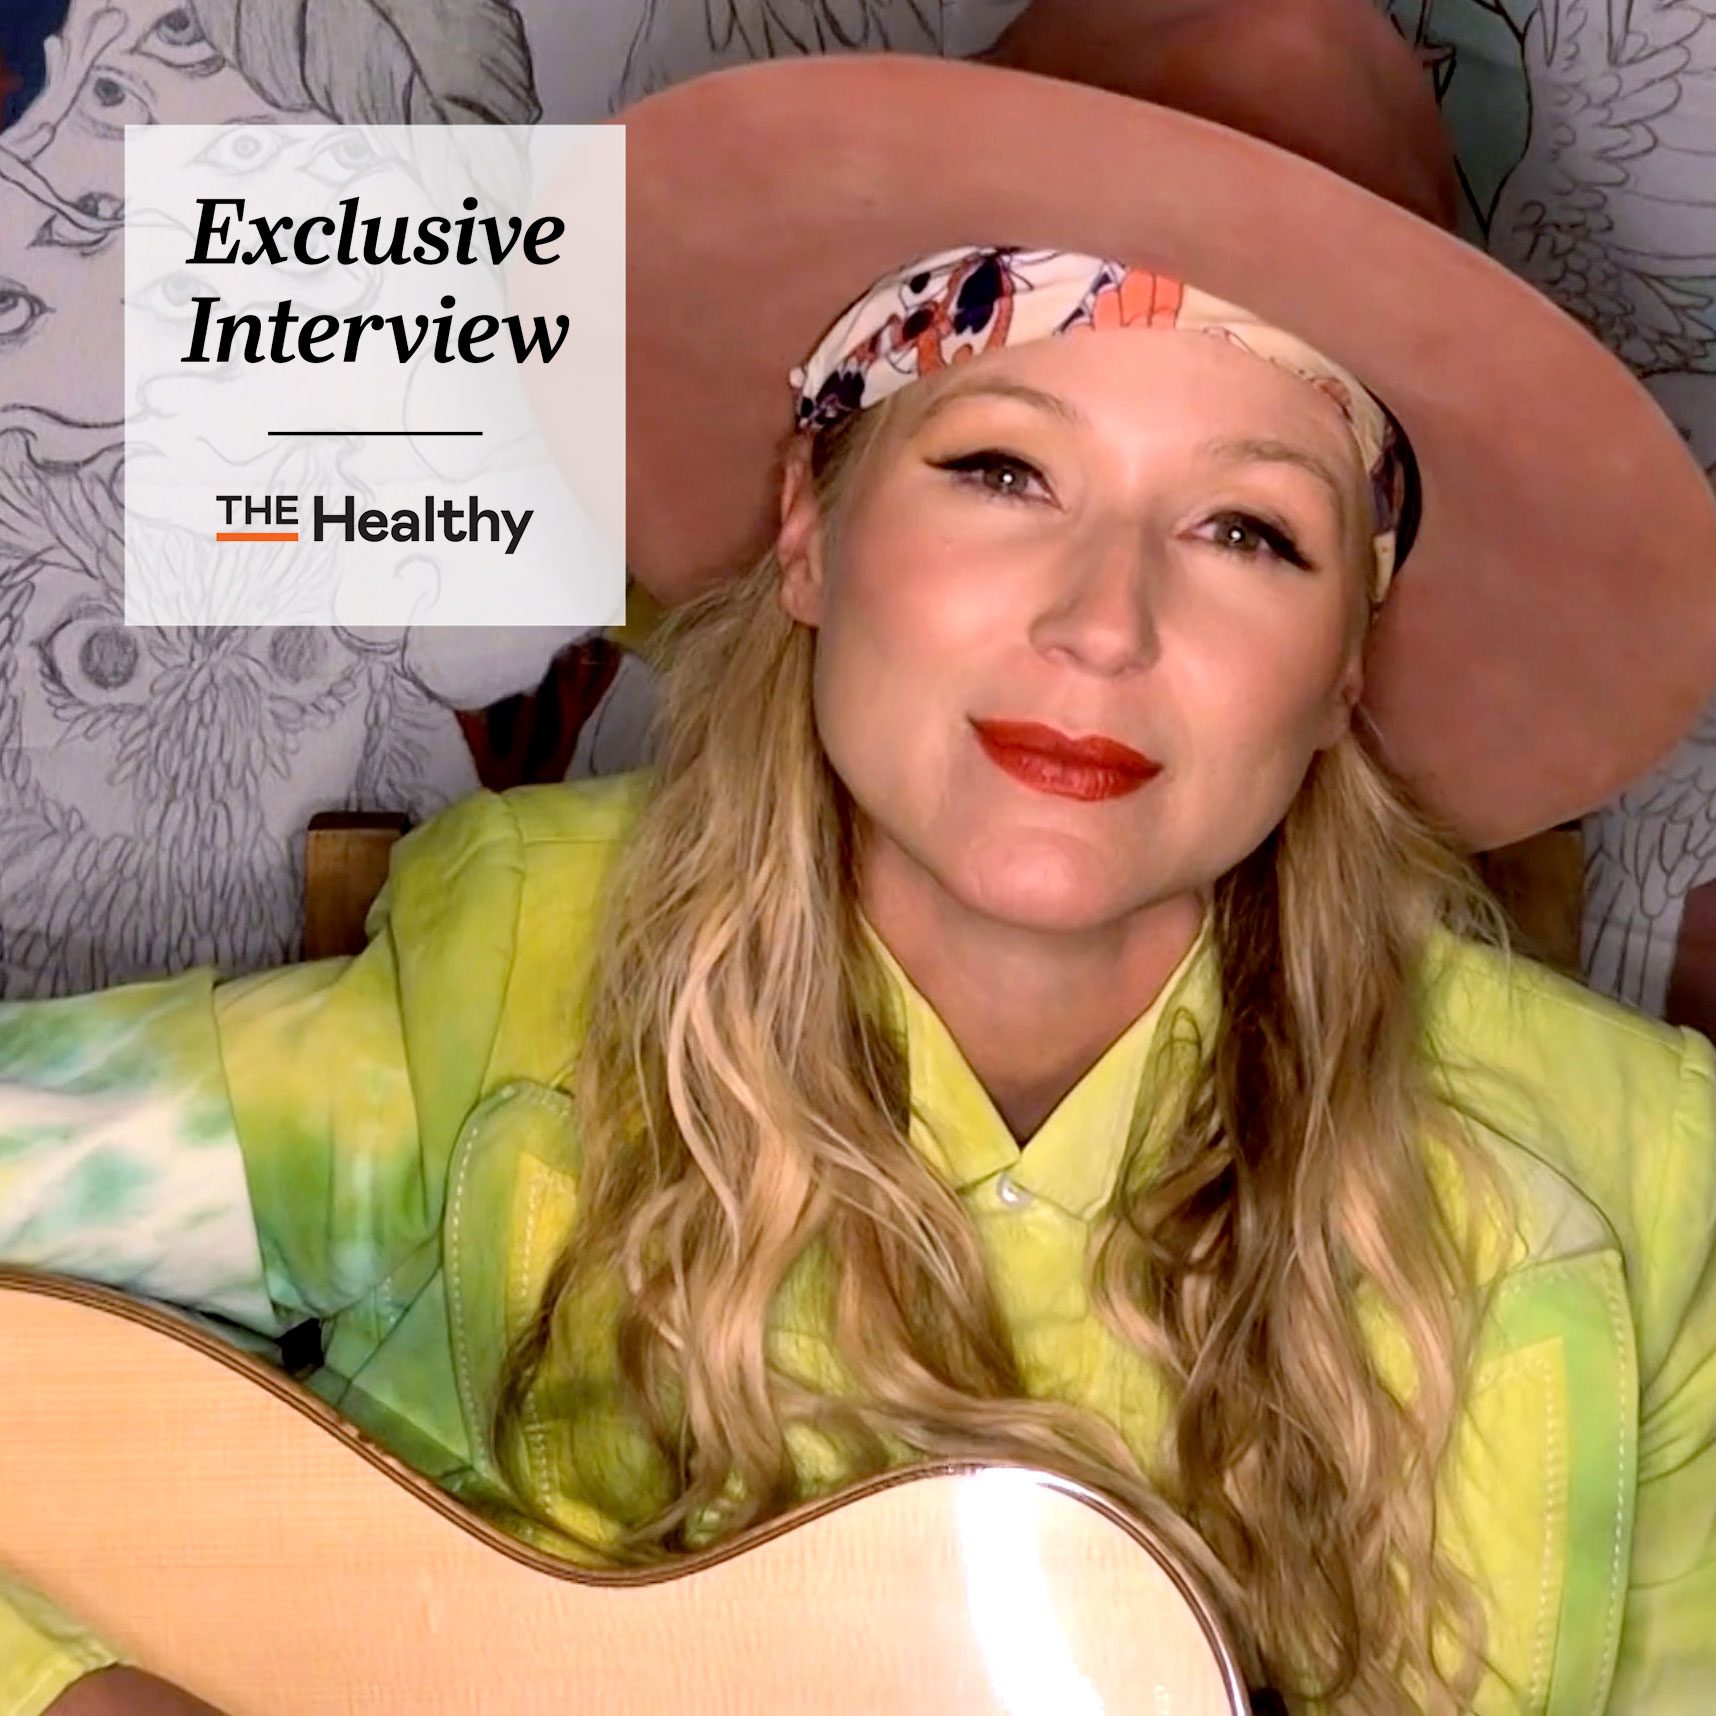 GrammyNominated SingerSongwriter Jewel Opens Up About Her Painful